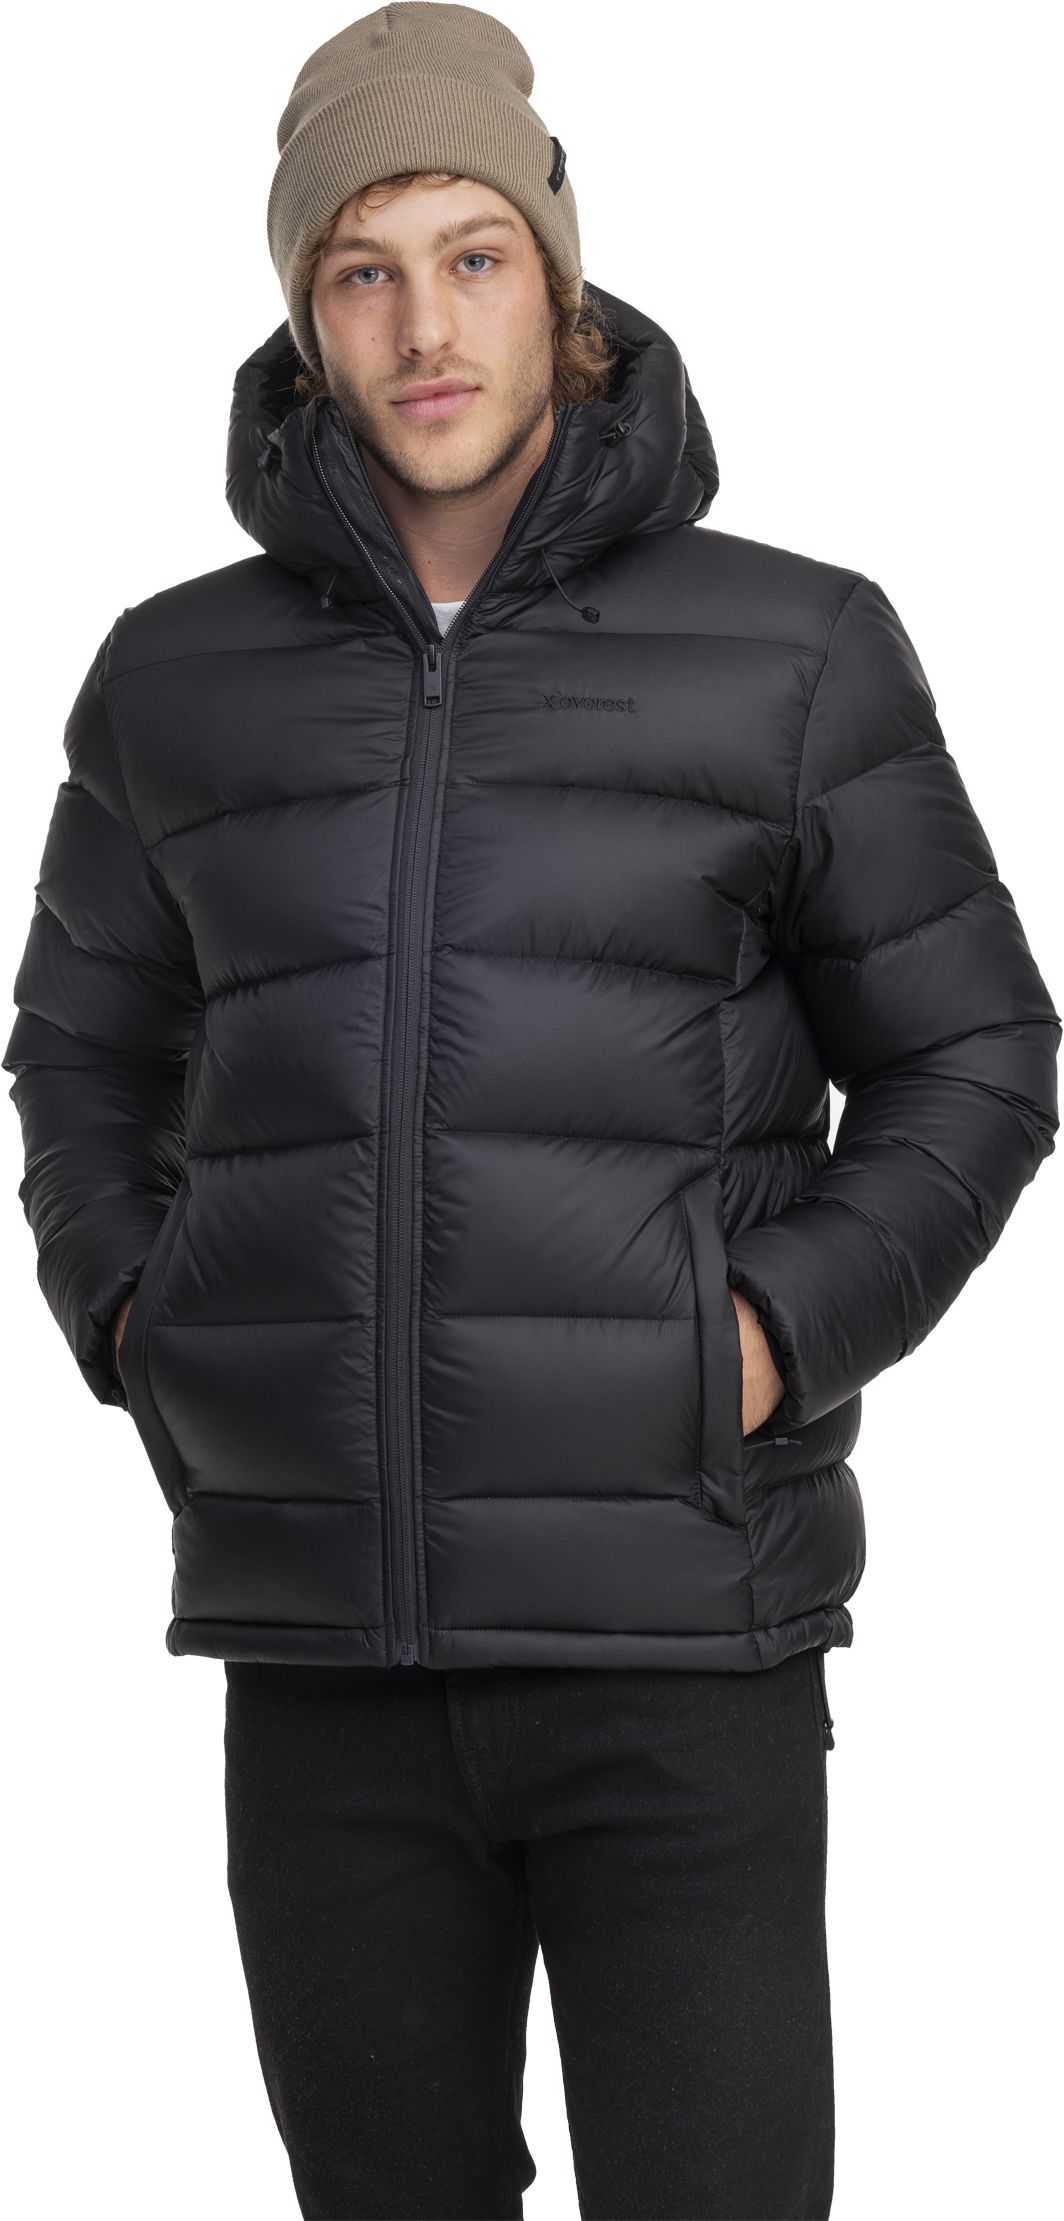 EVEREST, M EXPEDITION DOWN JACKET